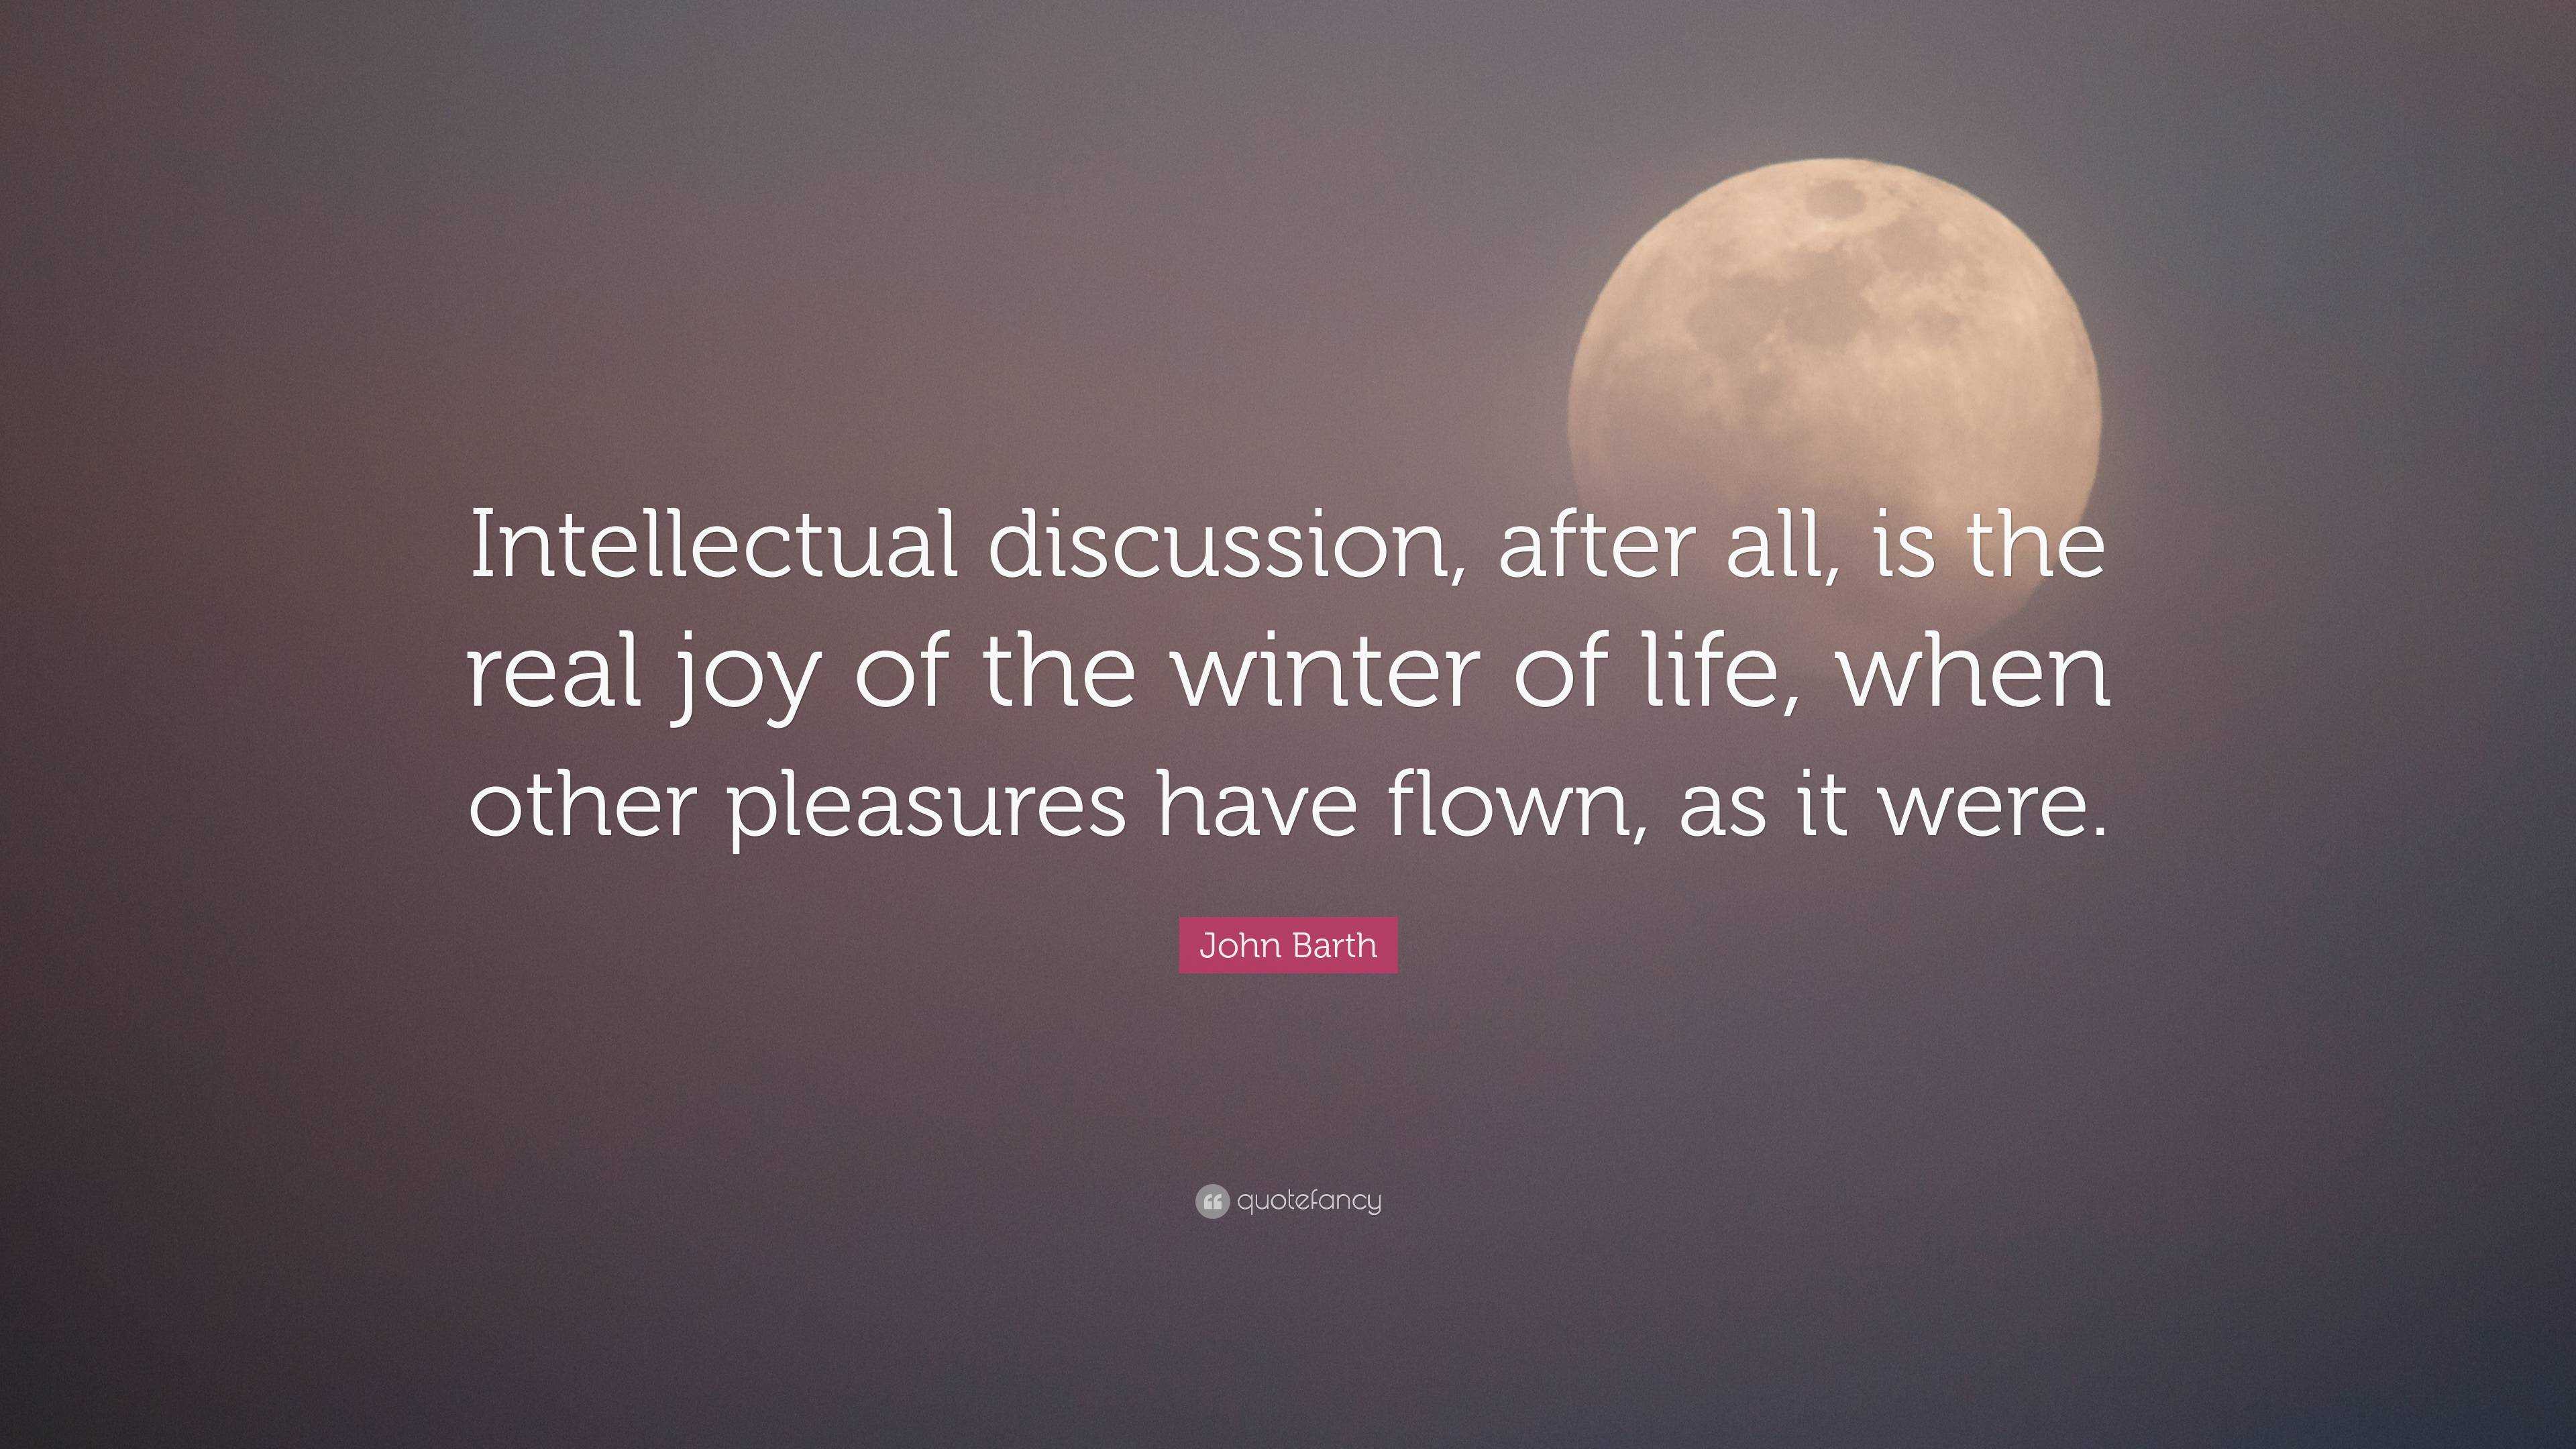 John Barth Quote: “Intellectual discussion, after all, is the real joy ...